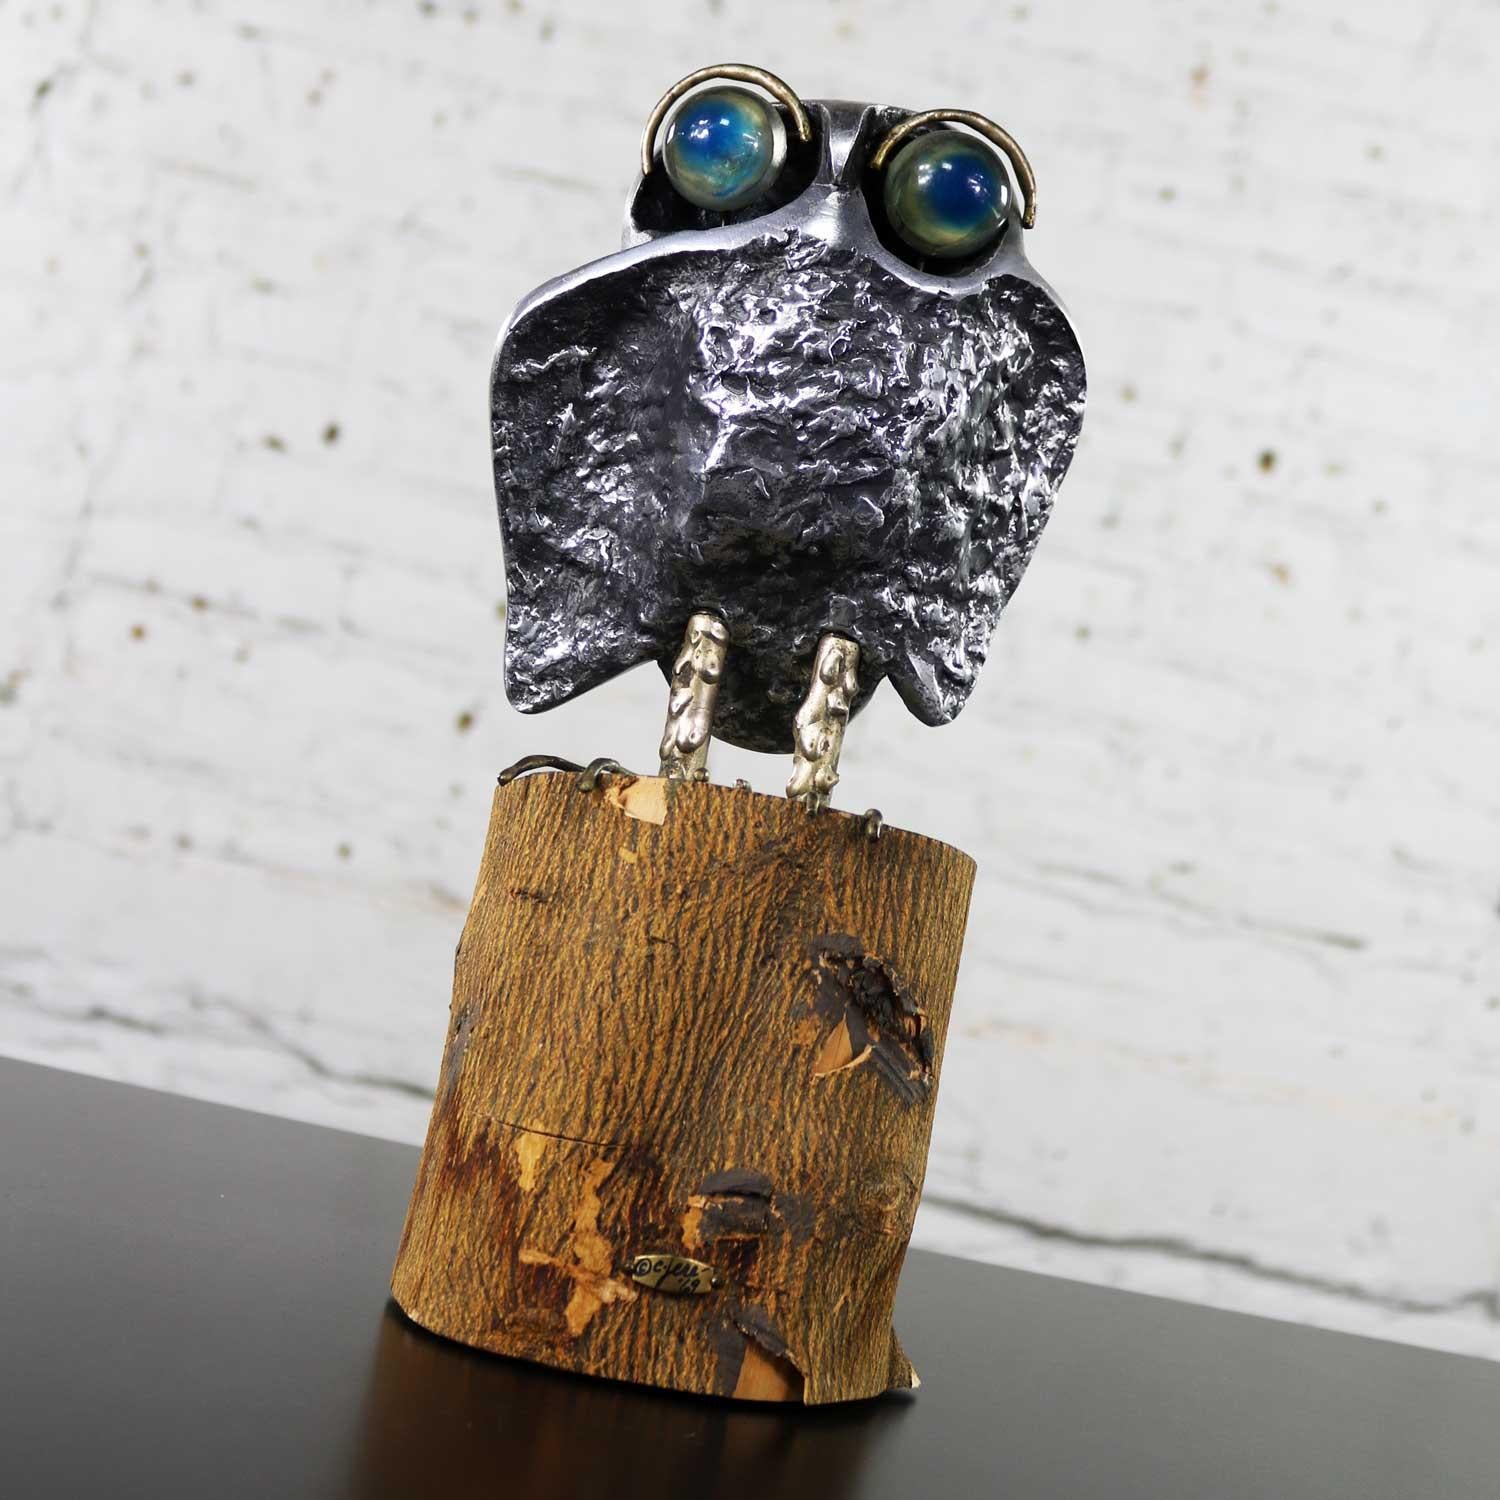 Handsome cast aluminum Mid-Century Modern owl sculpture by Curtis Jere on a natural bark-on wood stump. He has great acrylic eyes. He is in wonderful vintage condition with the normal wear you would expect with age. Some of the bark is peeling but